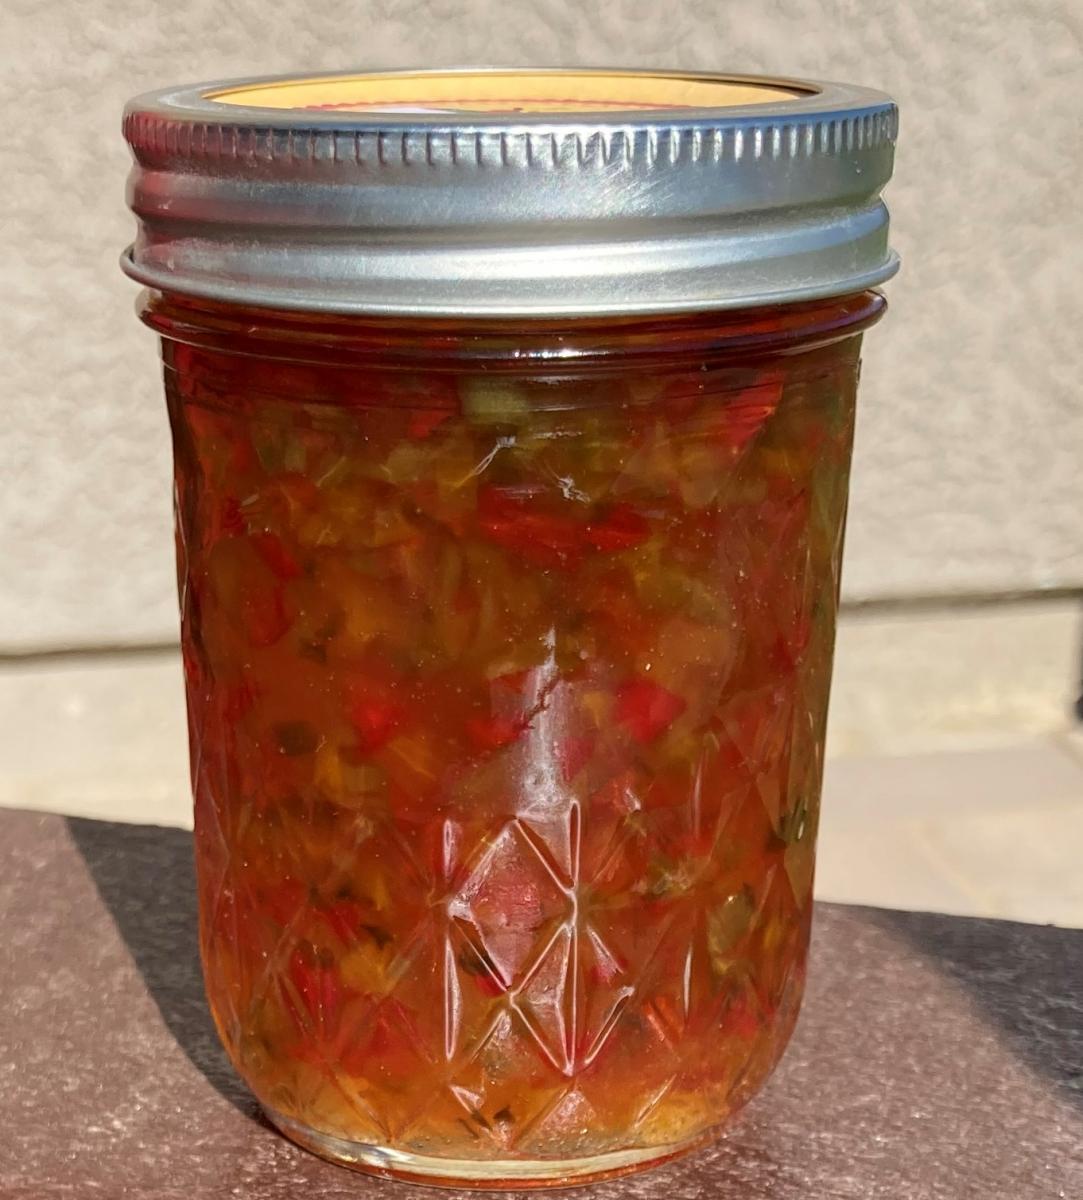 I gifted this jar of Hot Pepper Jelly that I made to one of my Gal Pals